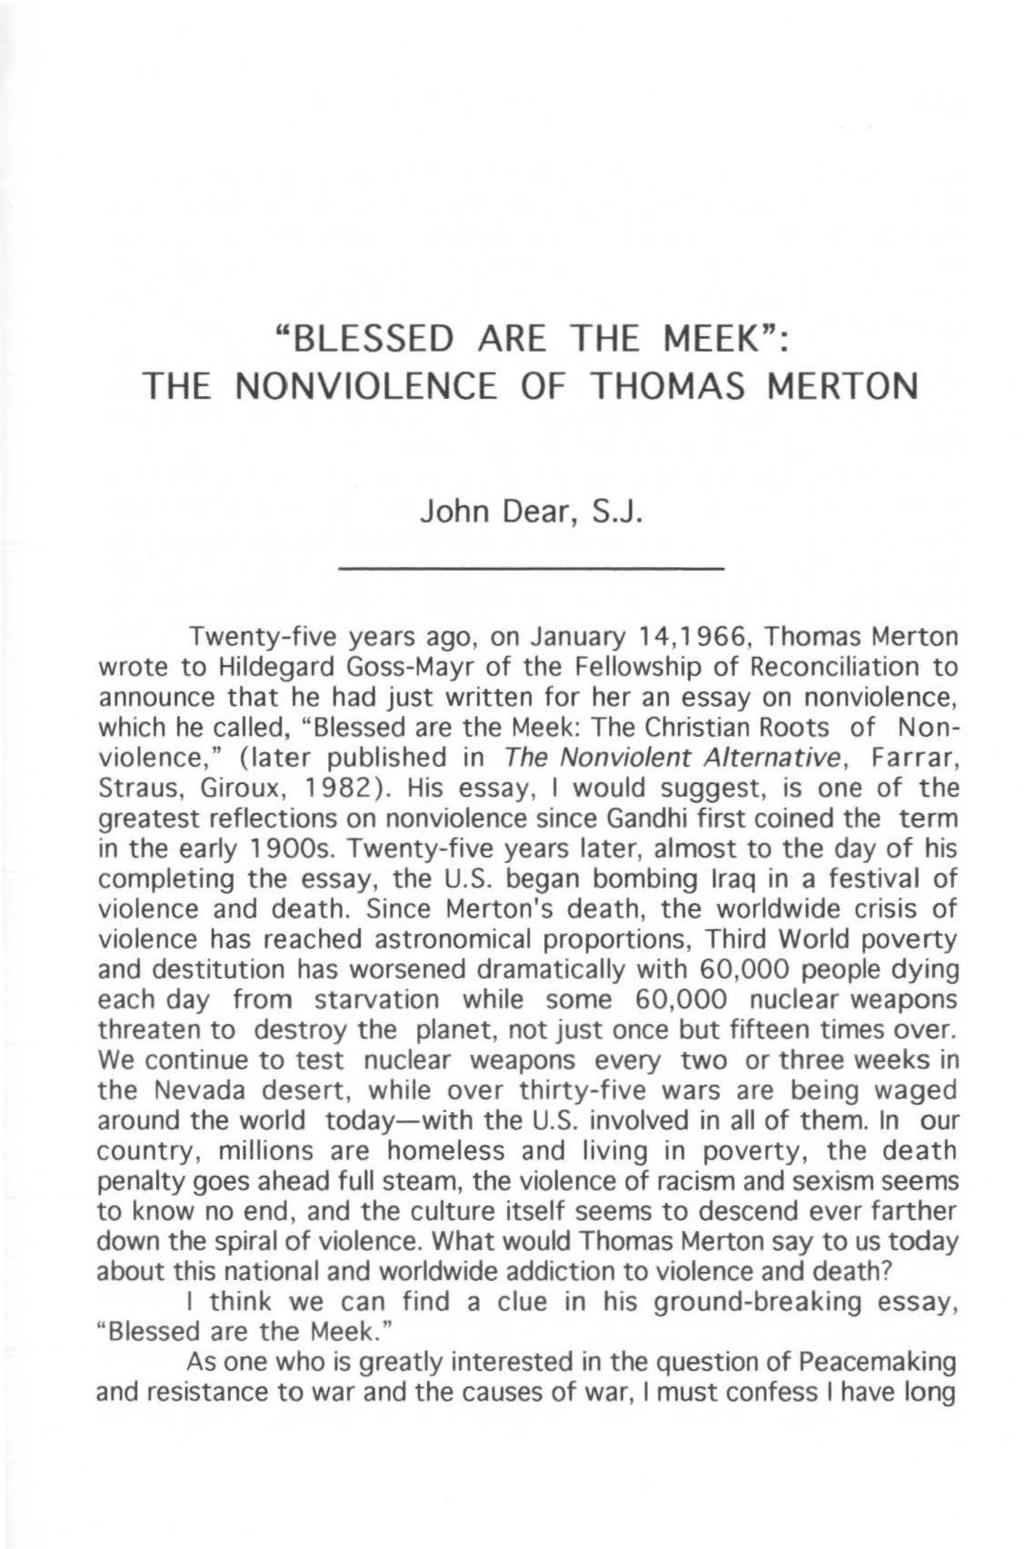 "BLESSED ARE THE MEEK": THE NONVIOLENCE OF THOMAS MERTON Jo